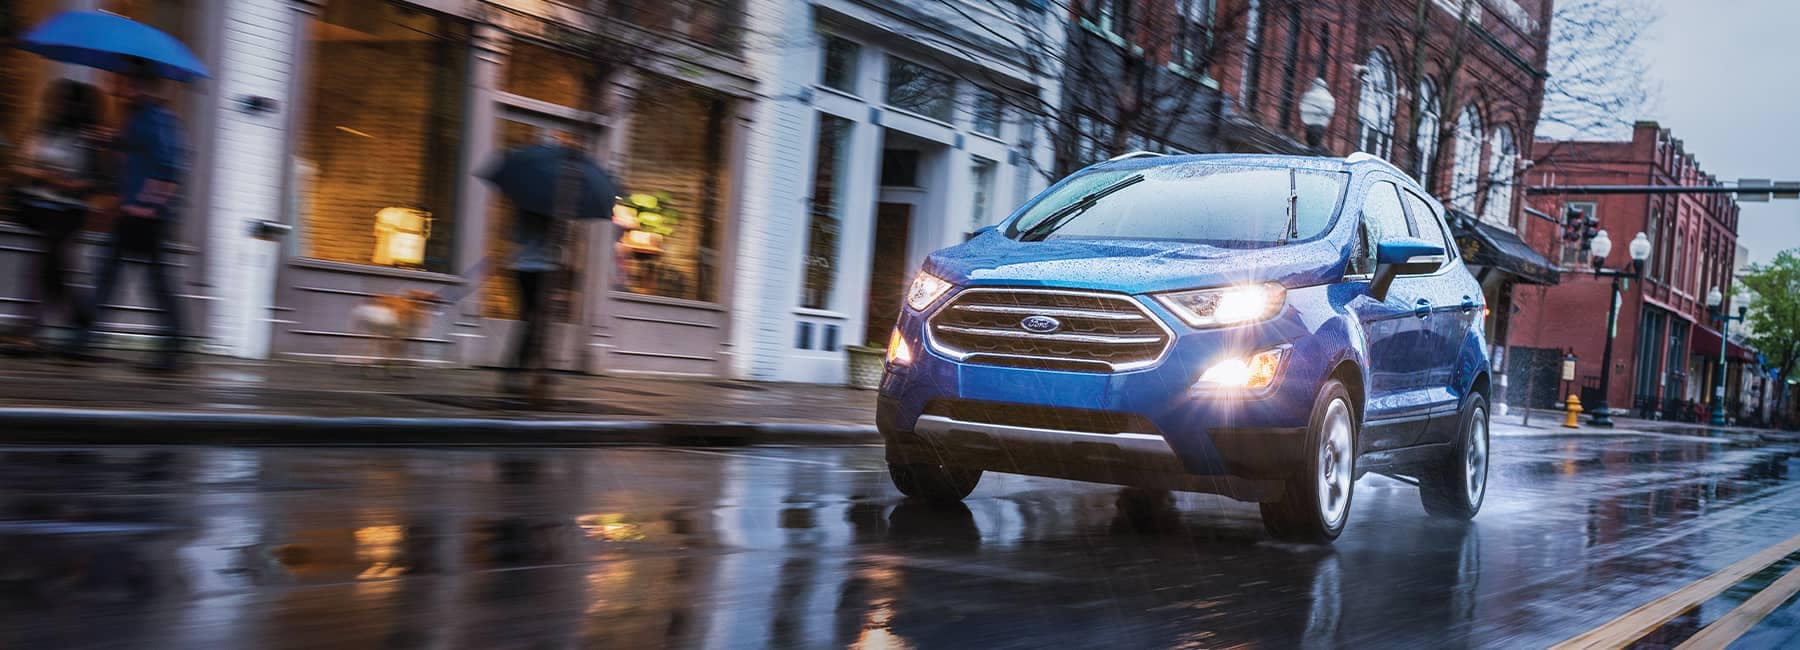 2021 Ford EcoSport driving on a rainy suburban town street